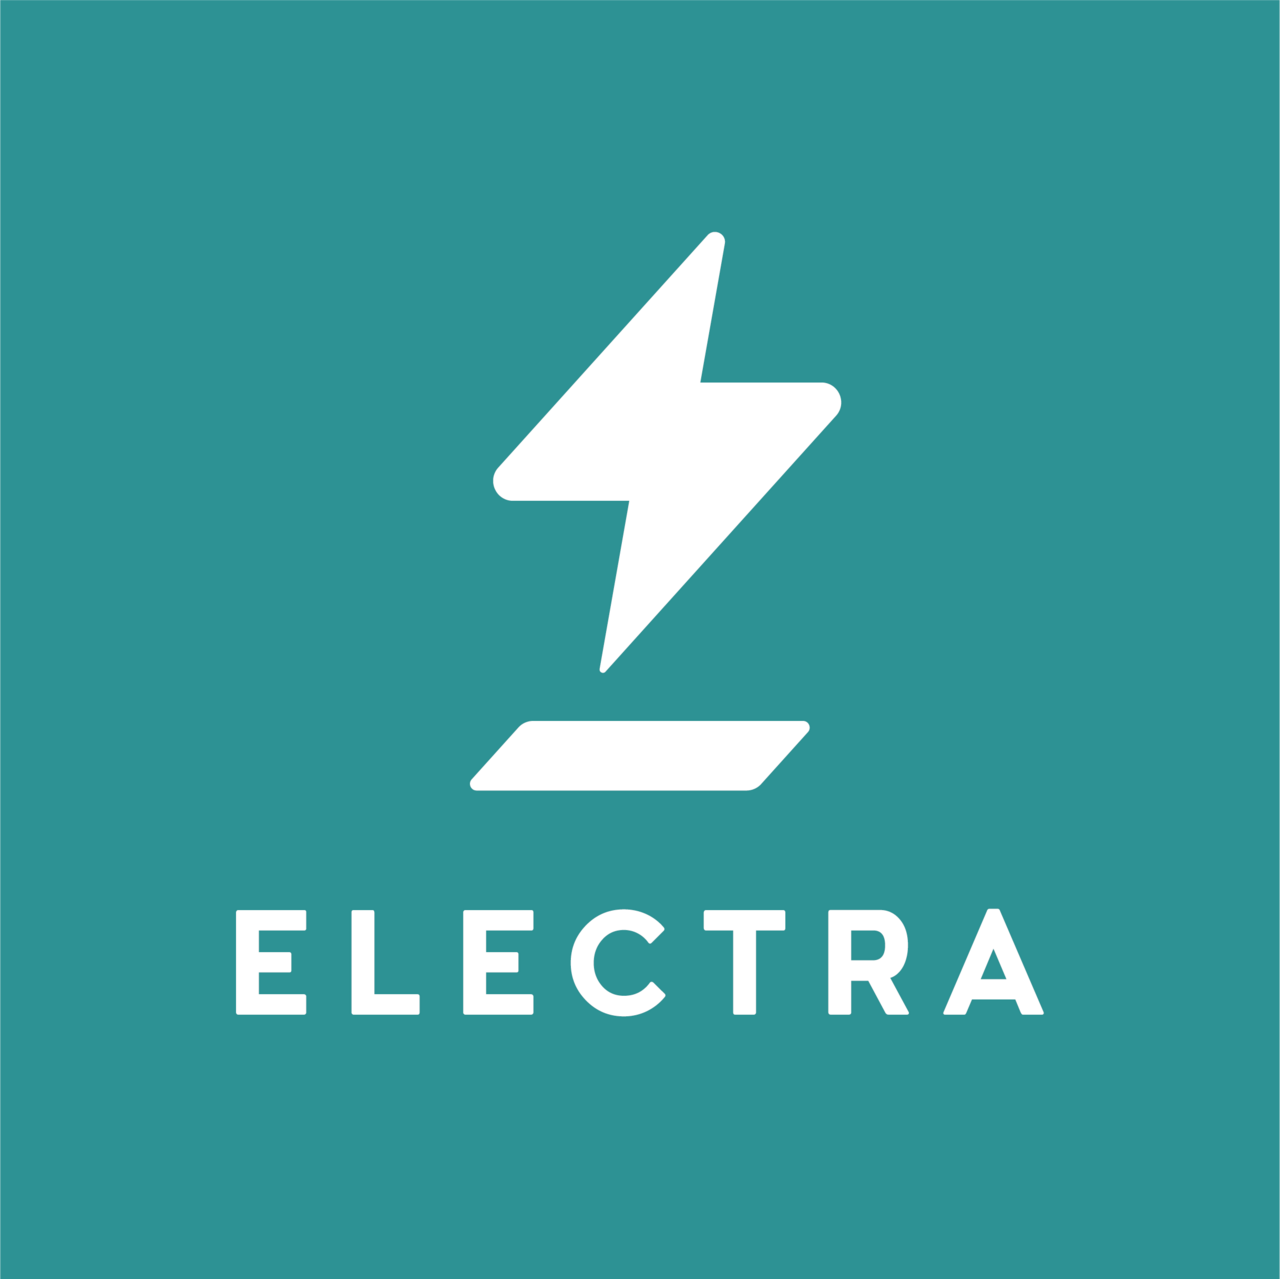 Electra becomes a regular member of CharIN